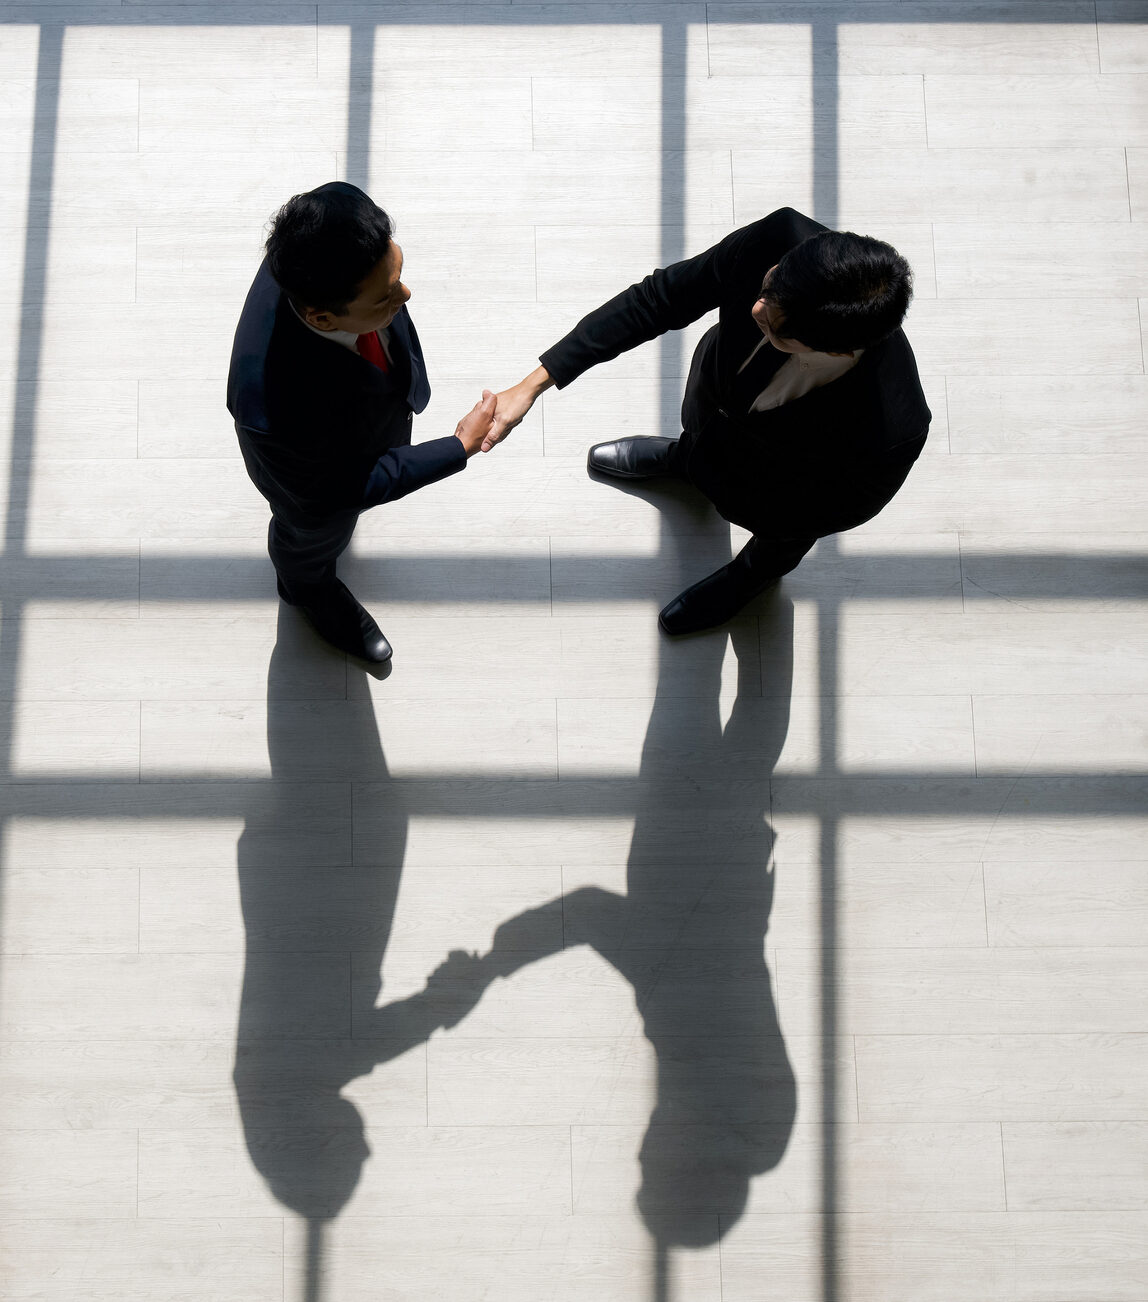 Business partners shaking hands in the modern office. Standing near the window while the sunlight shines on them. There is a shadow on the wooden floor